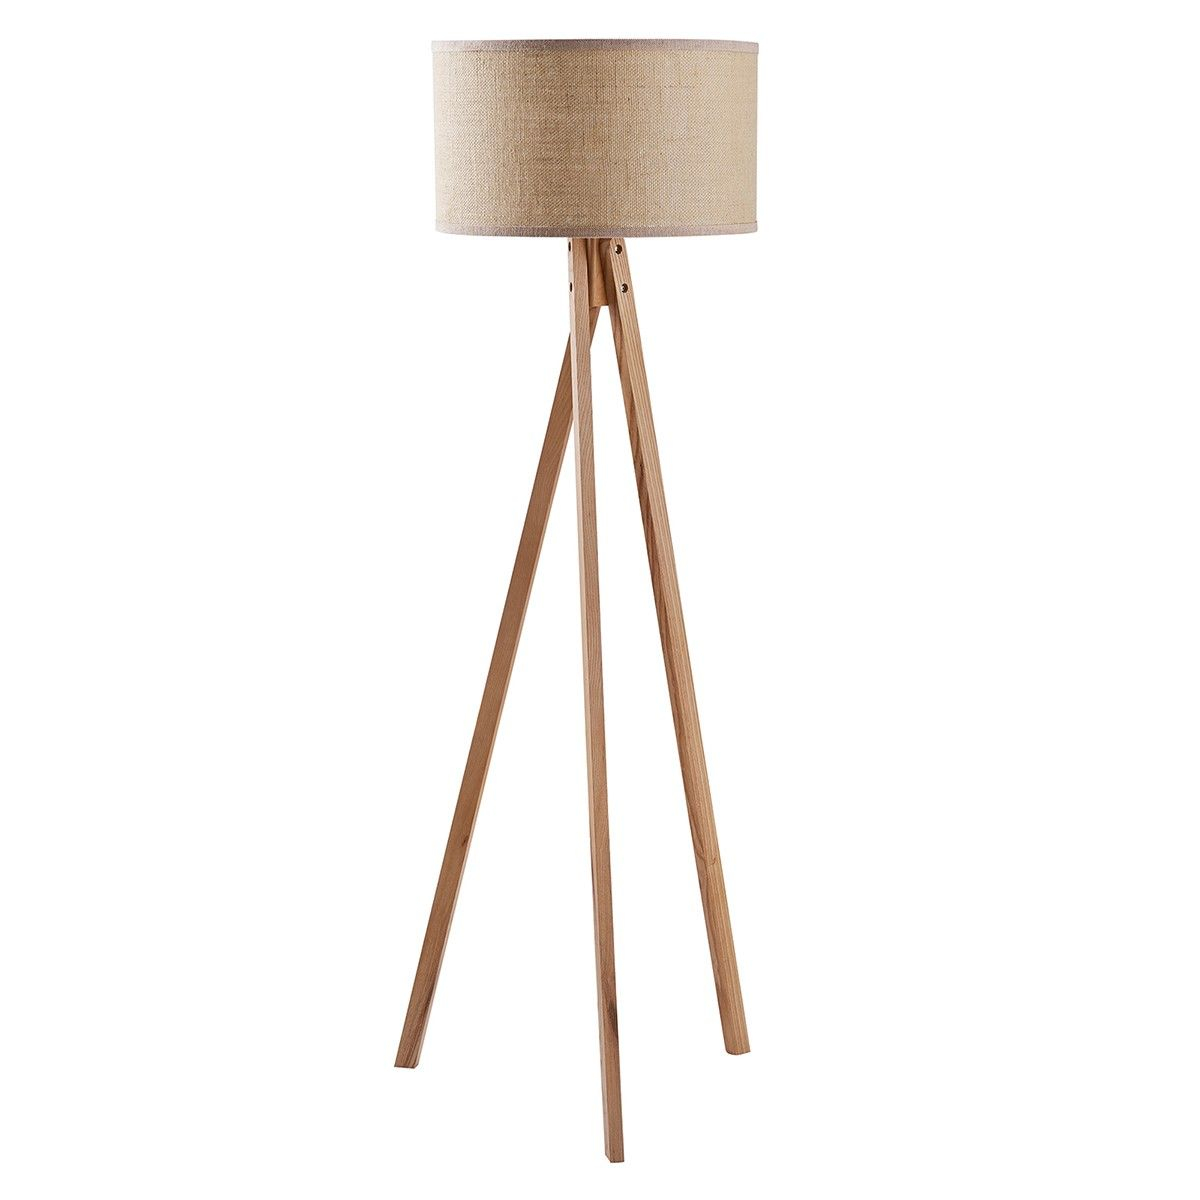 Hailey Wooden Tripod Floor Lamp With Linen Fabric Shade within proportions 1200 X 1200